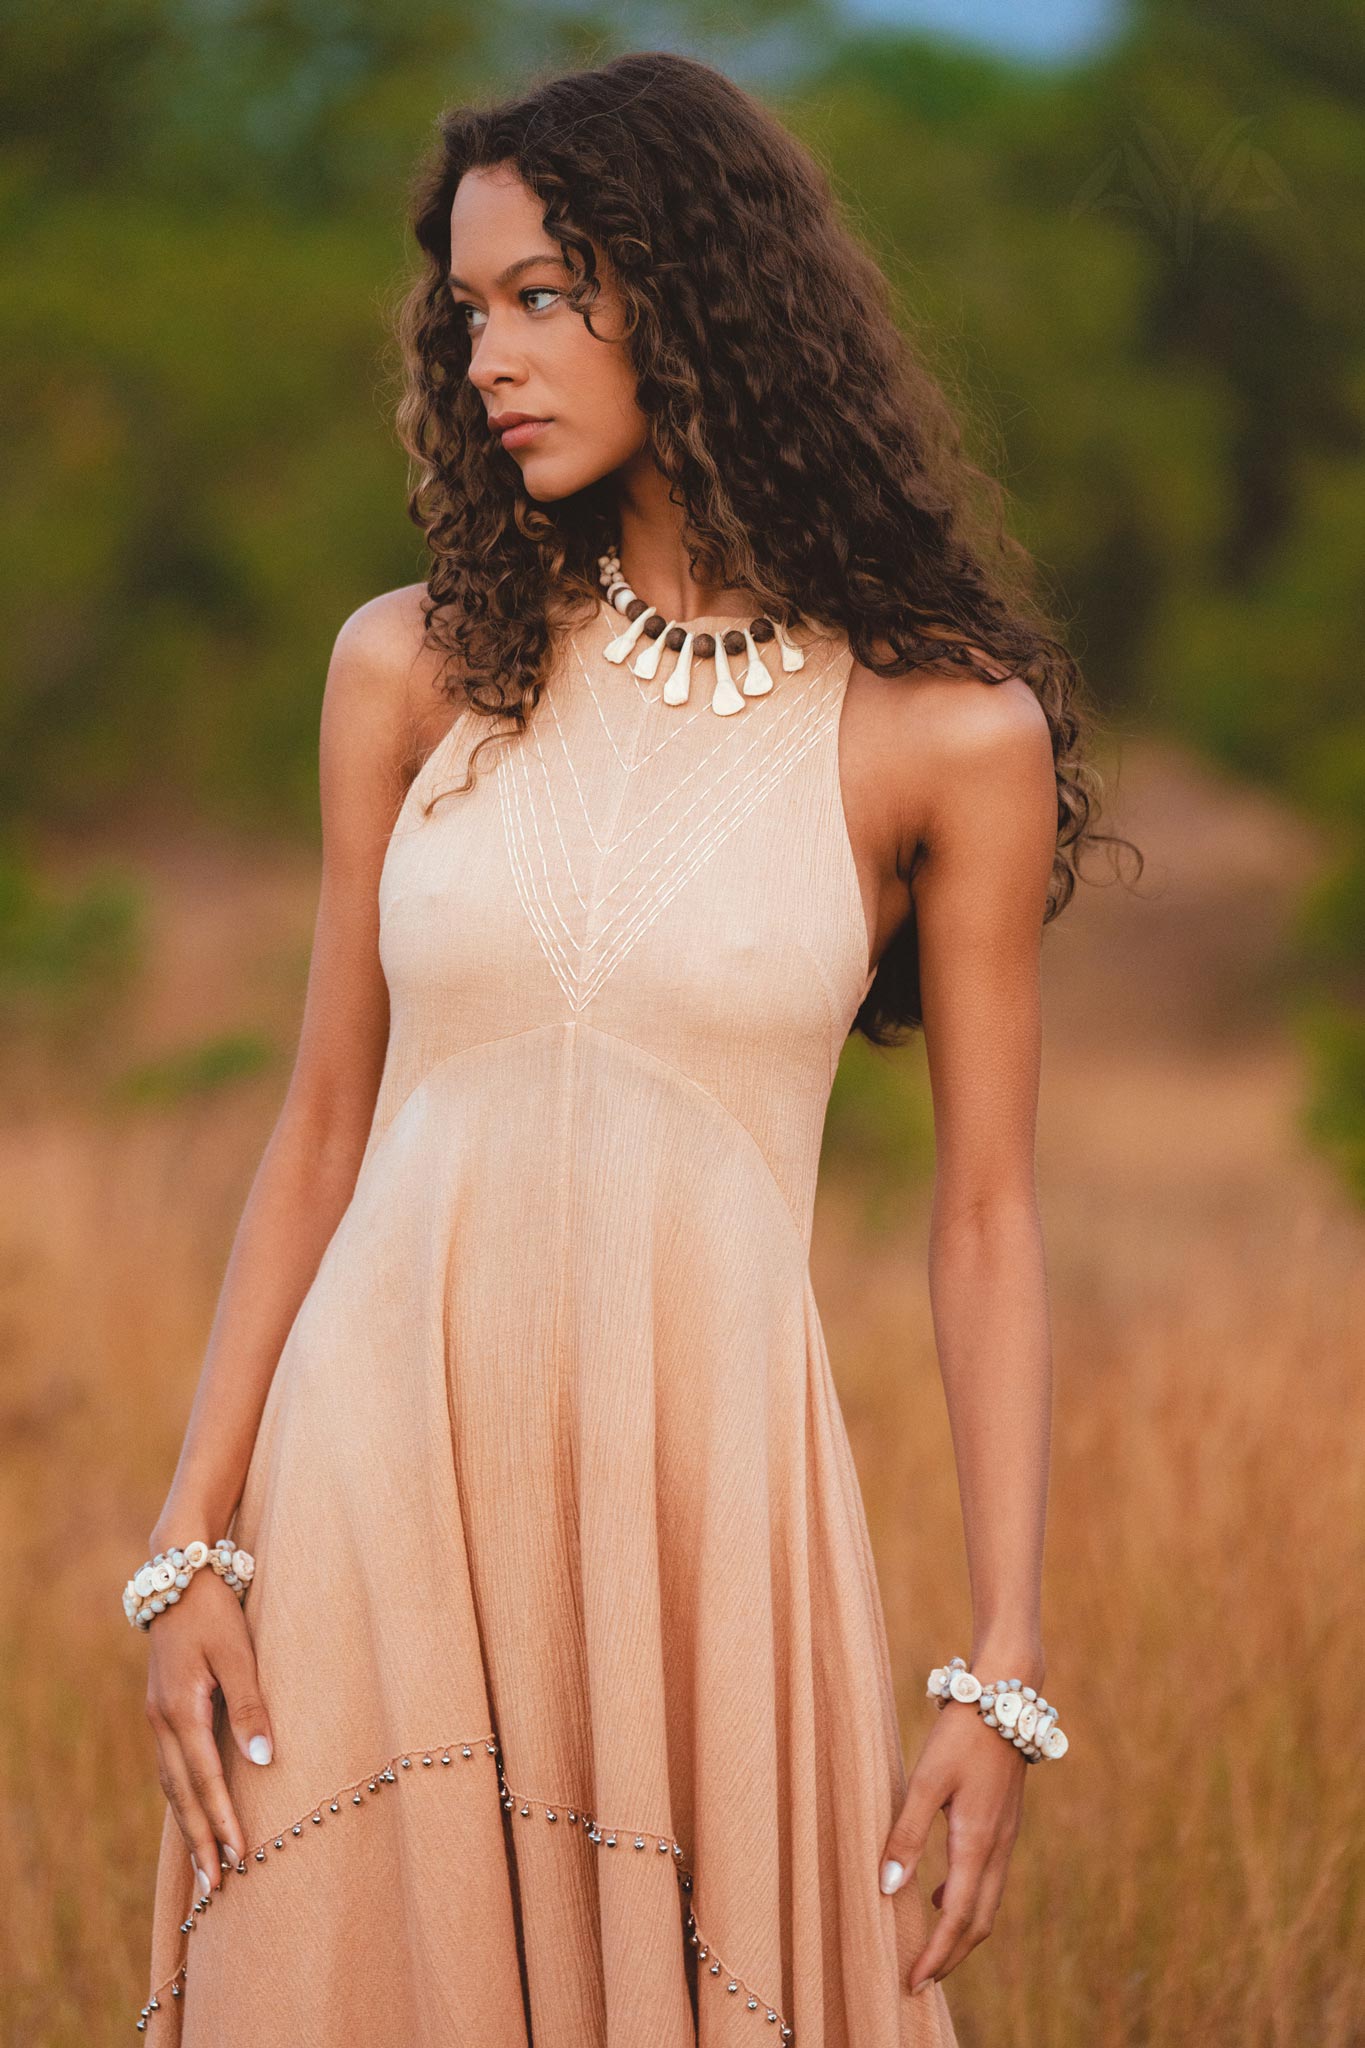 Look Stunning in the Powder Pink Small Bells Dress from Aya Sacred Wear.